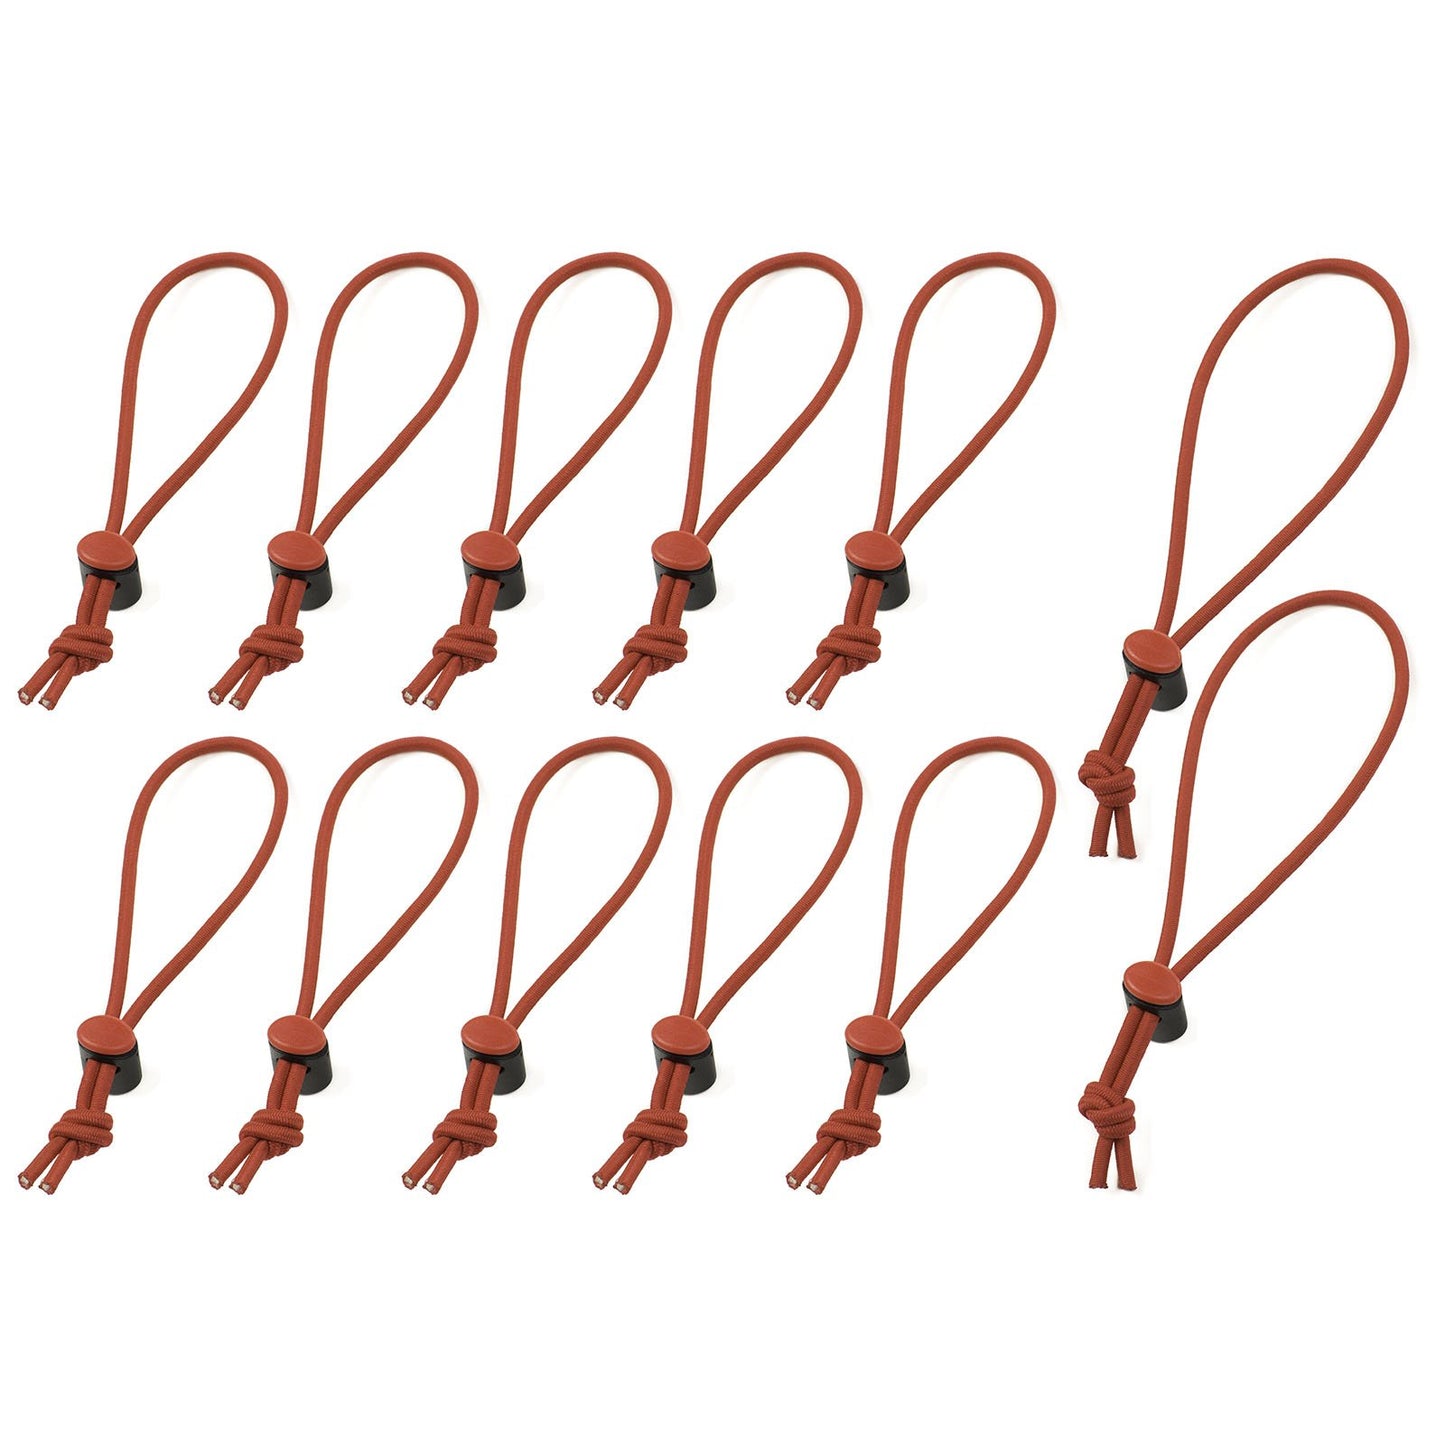 Think Tank Red Whips Adjustable Cable Ties (10 Pack)